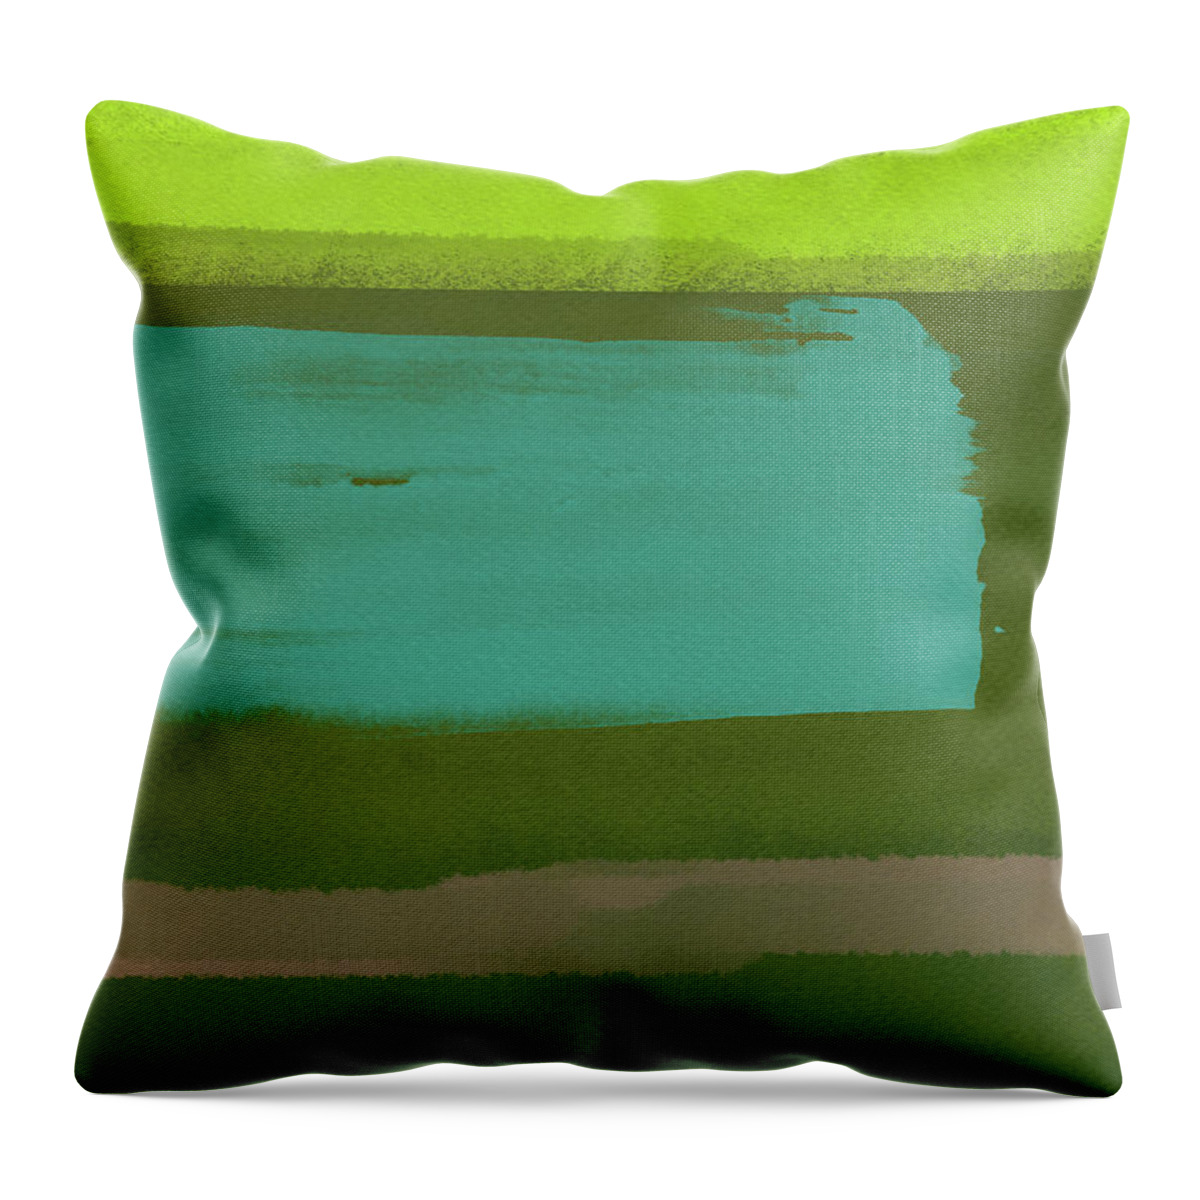 Landscape Throw Pillow featuring the painting Sage Green Abstract Watercolor by Naxart Studio